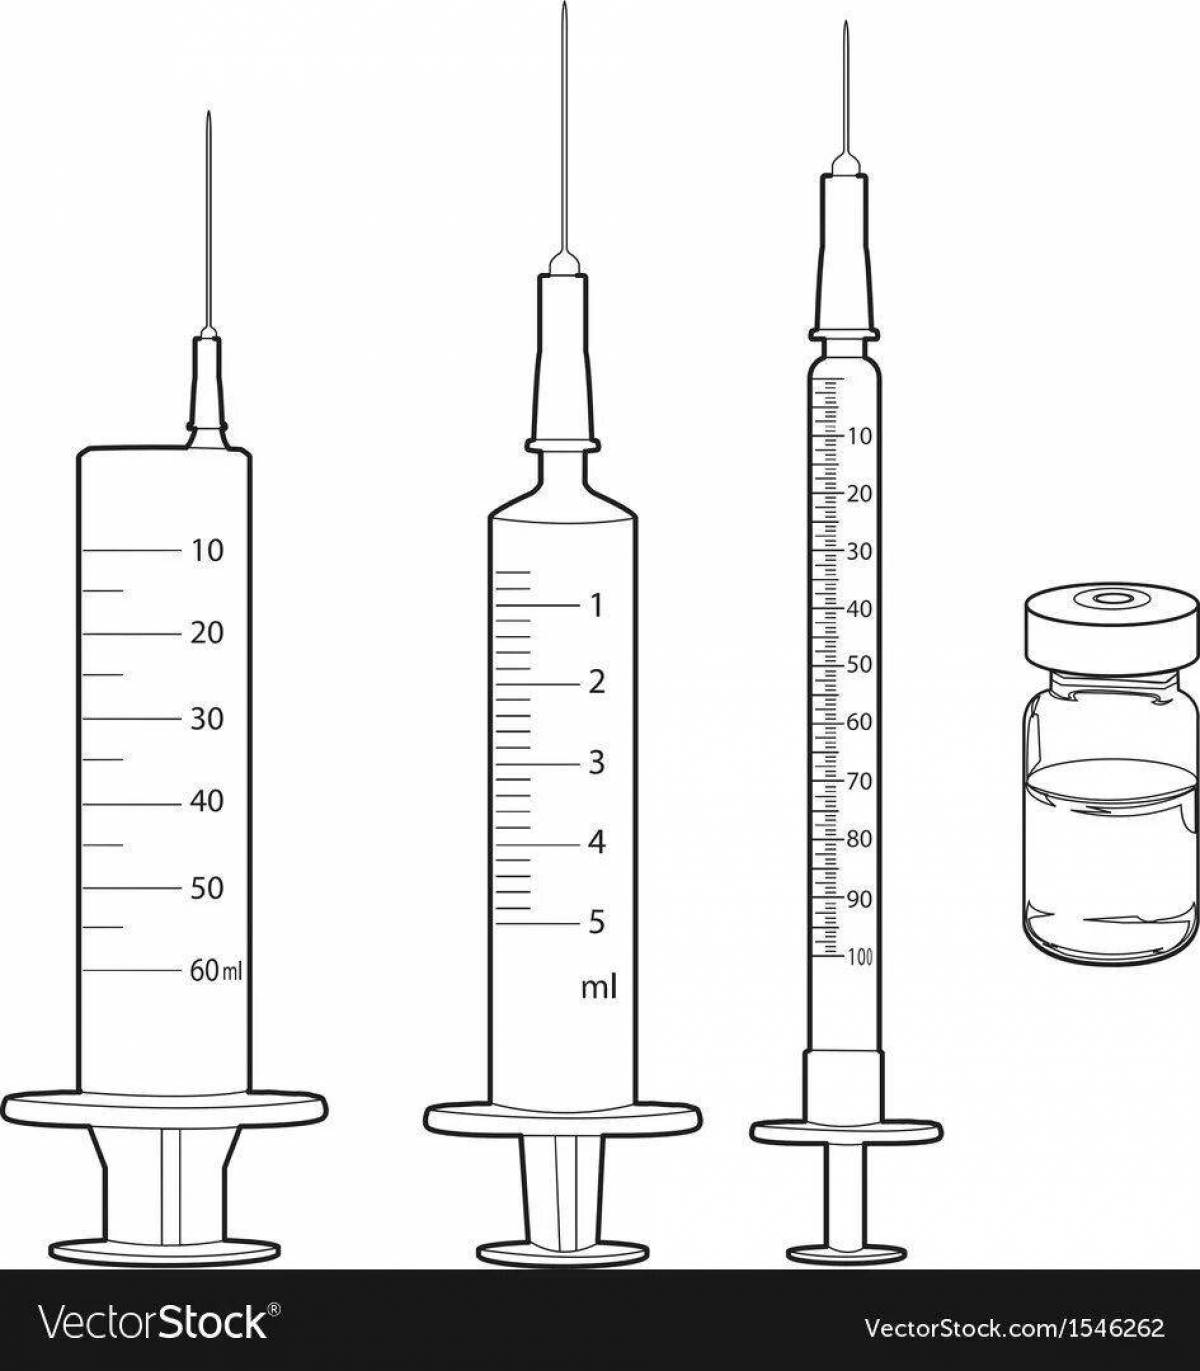 Colouring a cheerful syringe with a needle